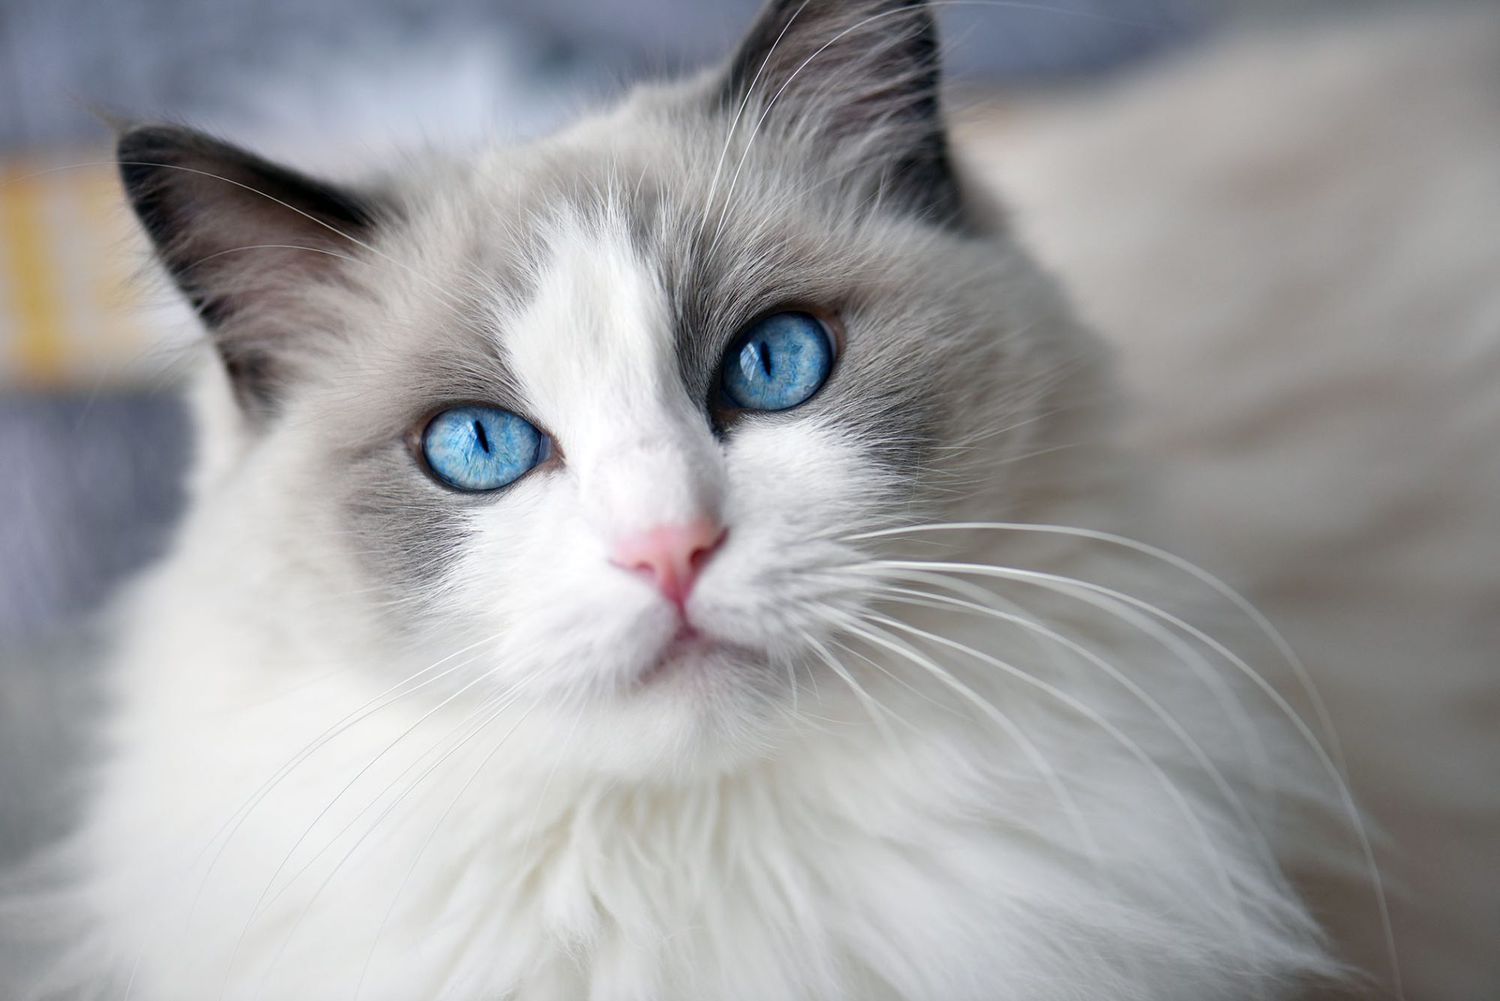 32 interesting facts about Ragdolls (a type of cat)